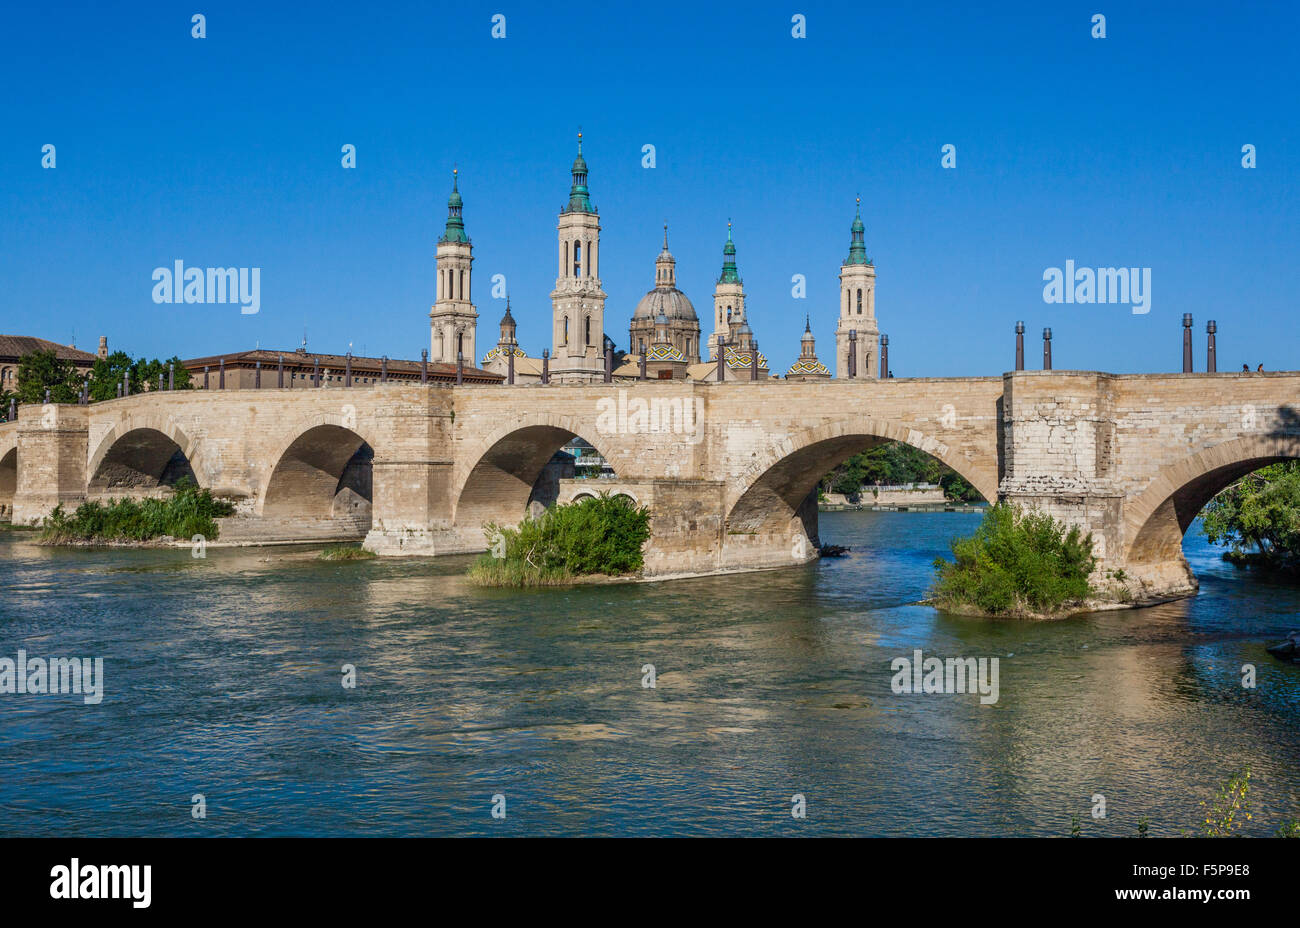 Spain, Aragon, Zaragoza, view of the Baroque style Basilica-Cathedral of Our Lady of the Pillar across the Ebro River with Puent Stock Photo